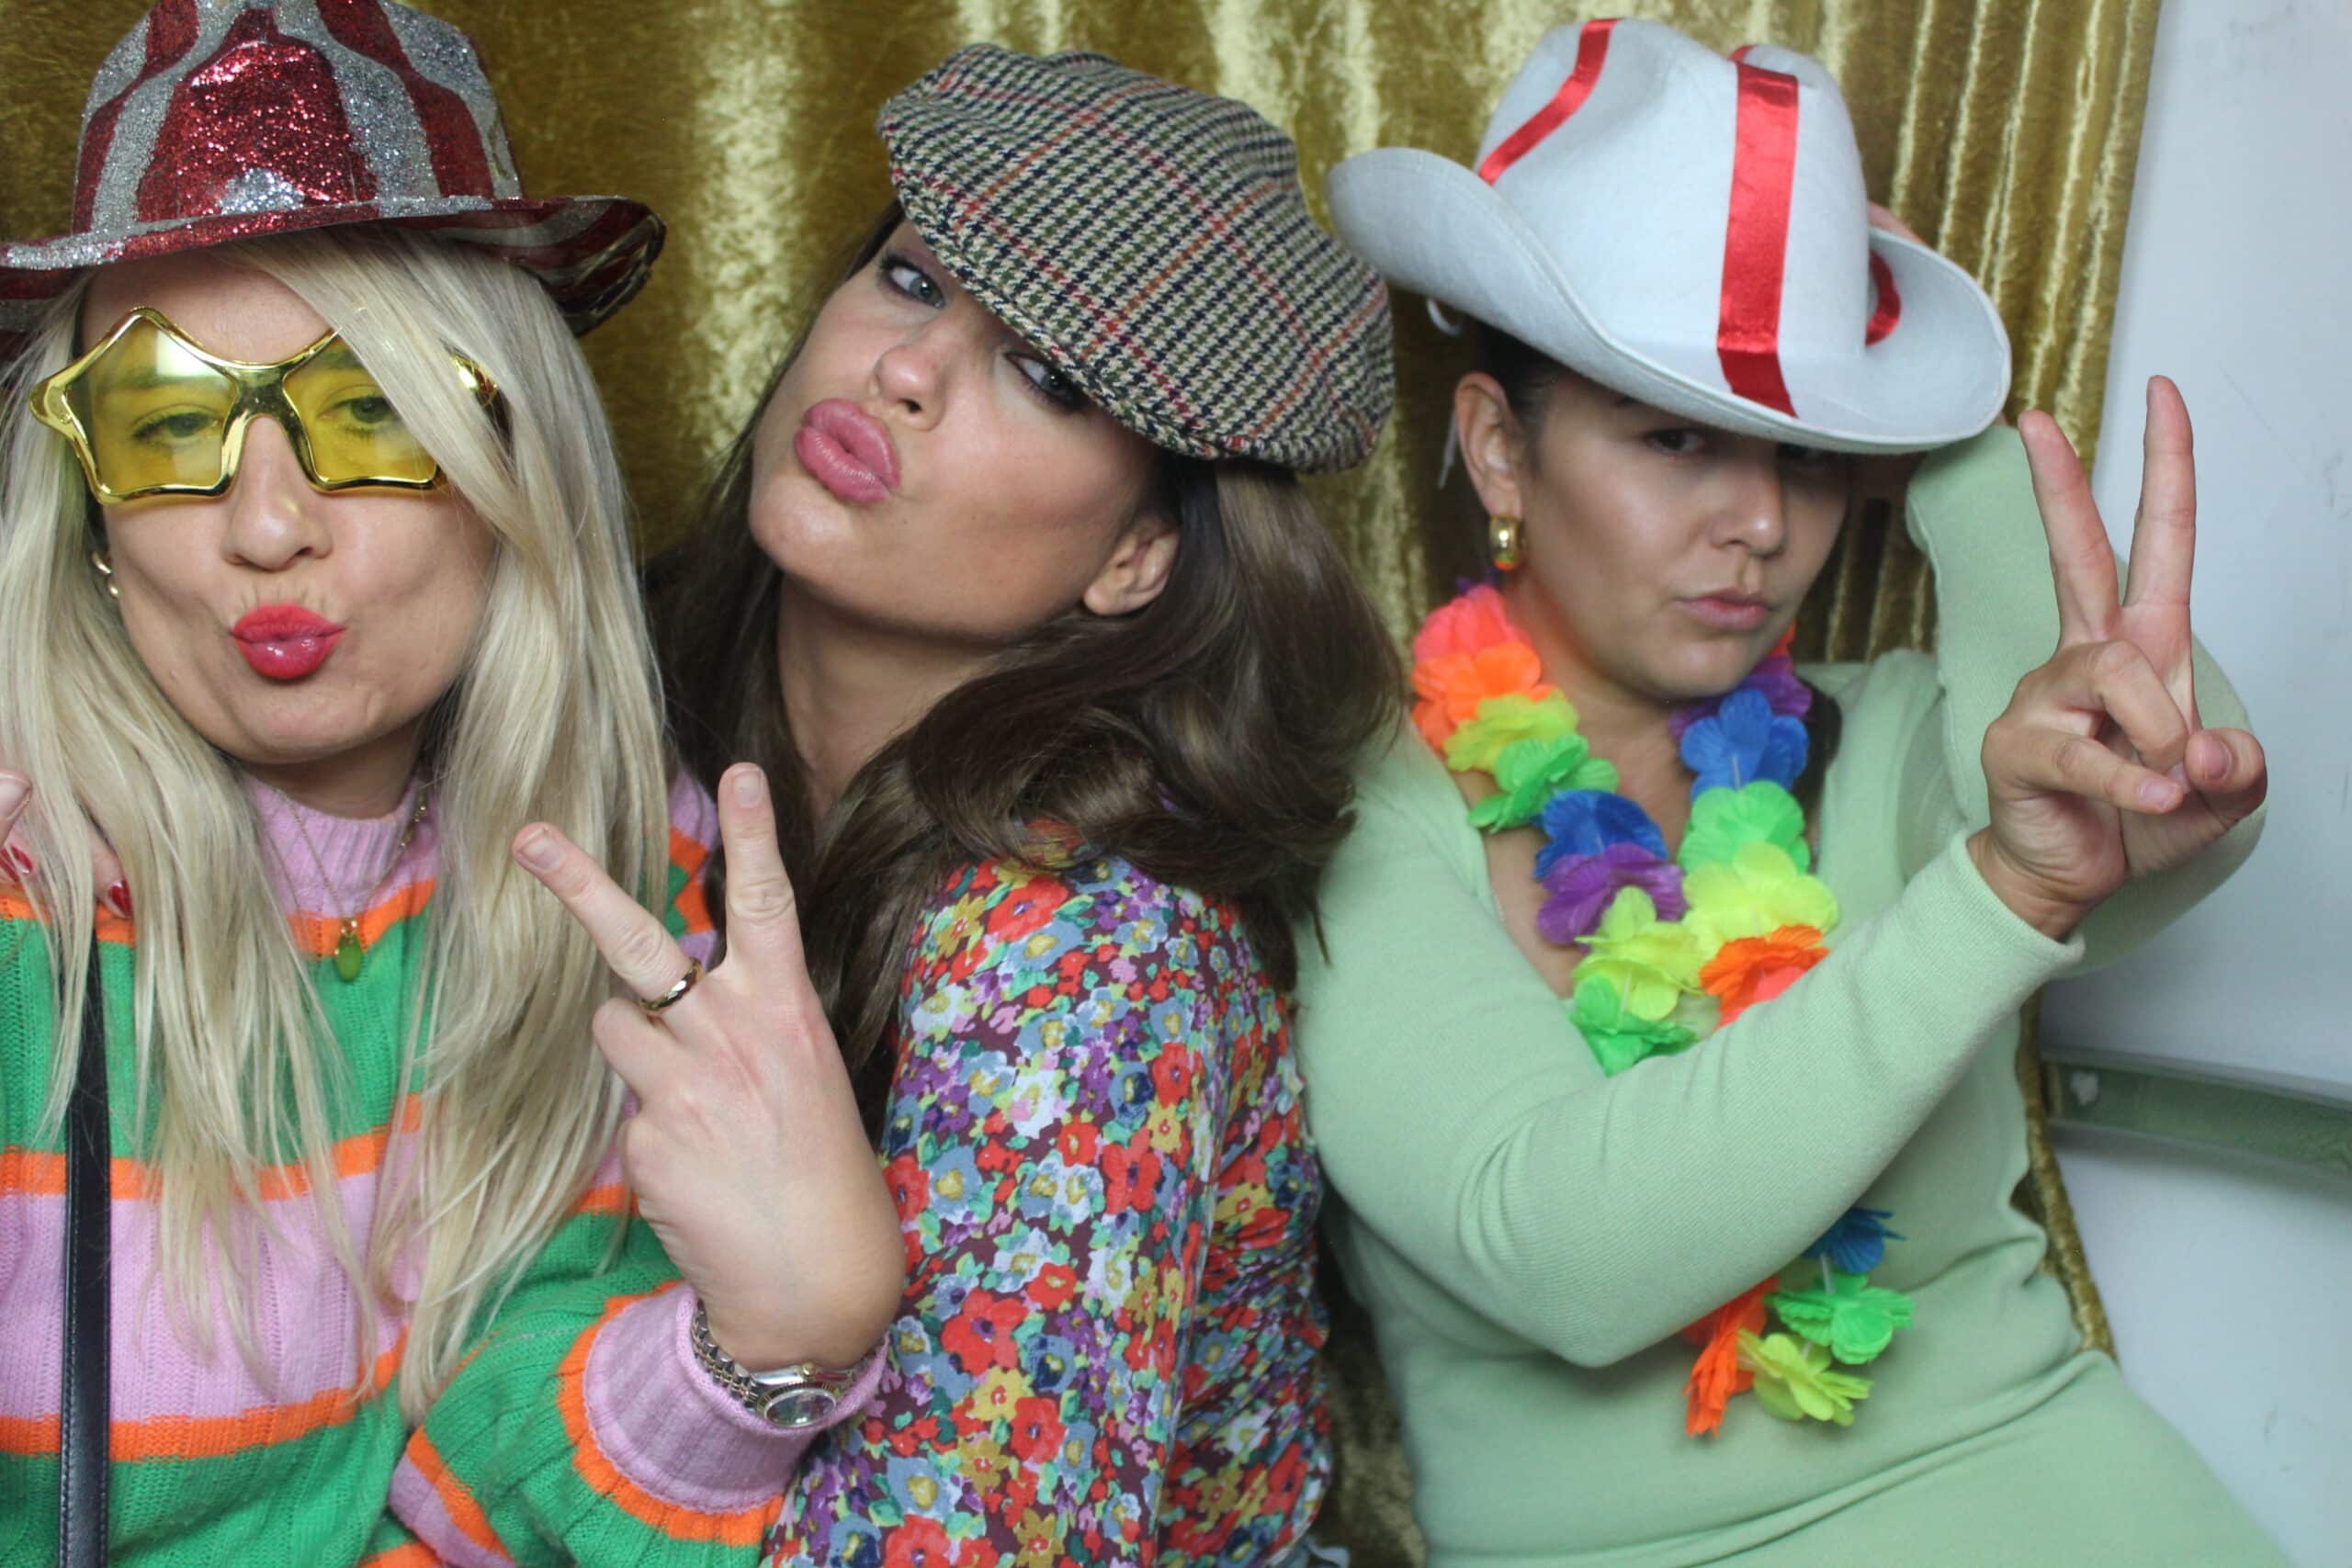 Party Photo Booth Rental in Sussex: Creative Themes & Tips